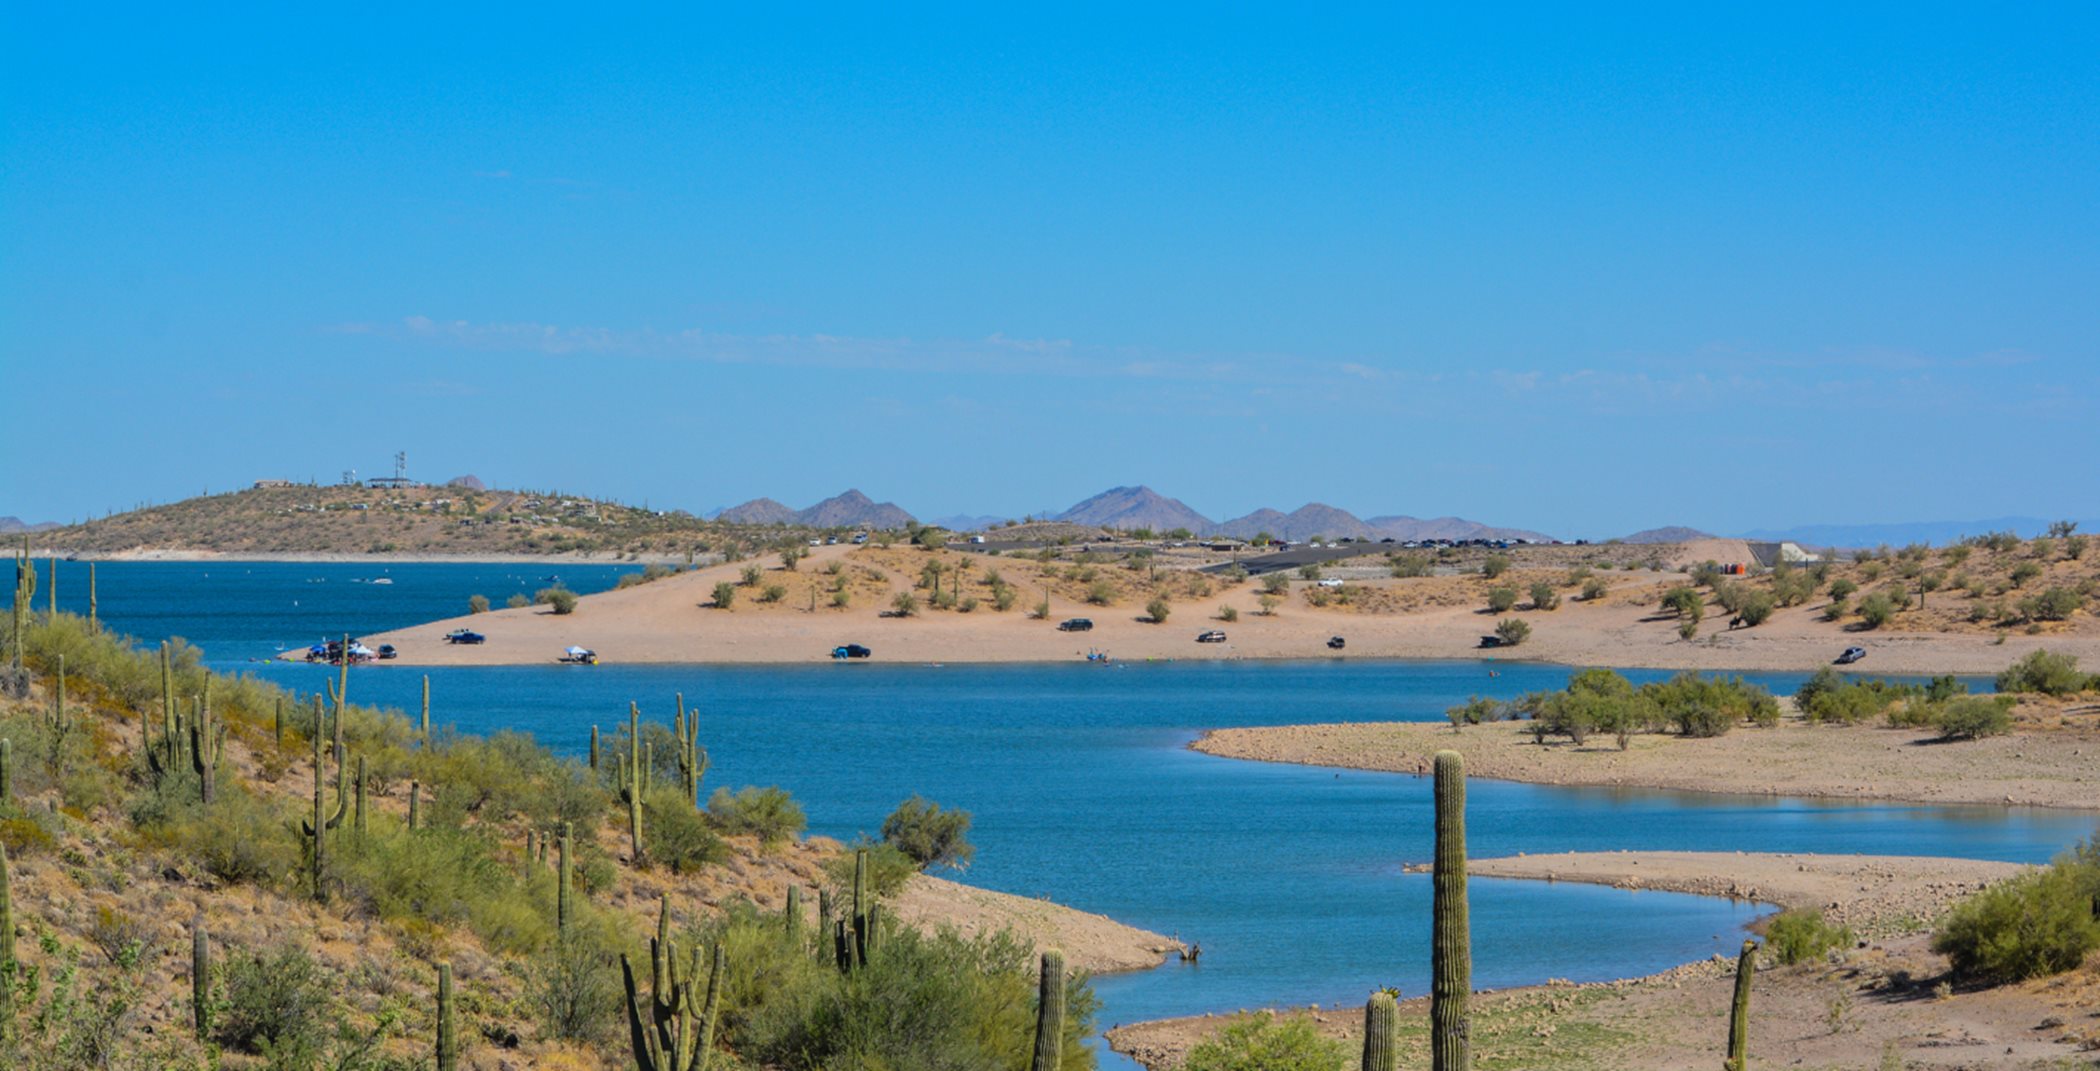 Lake Pleasant surrounded by a desertscape